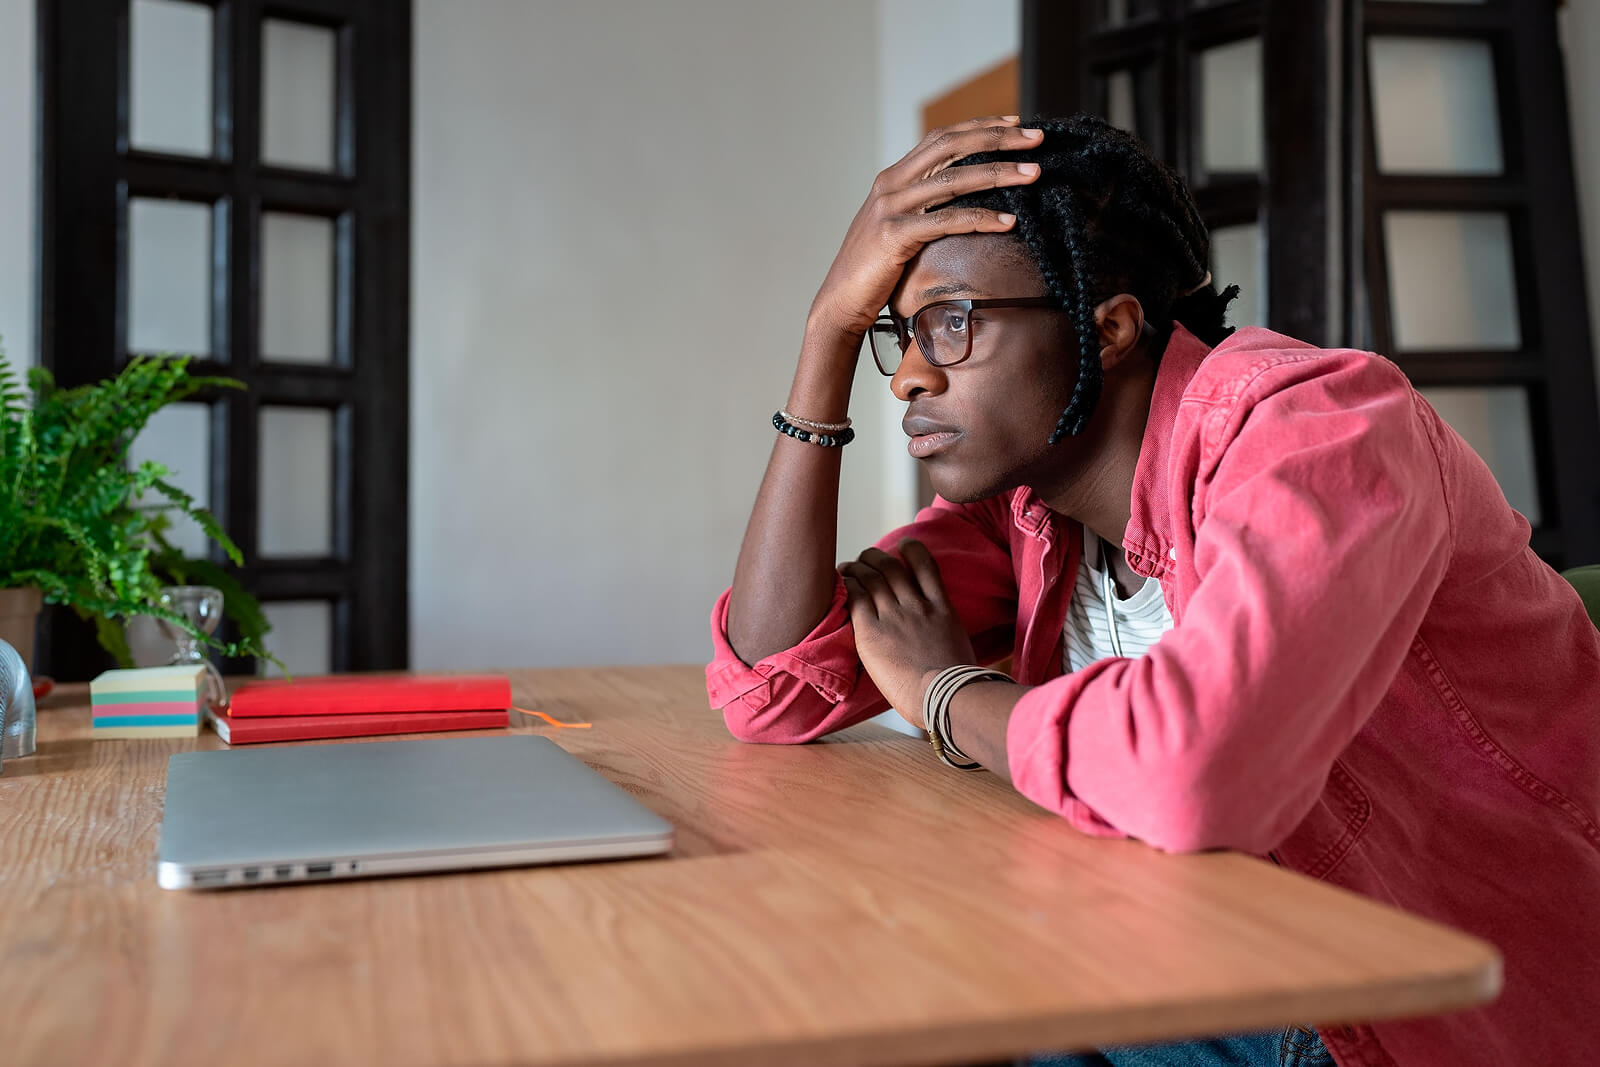 Image of a Black man sitting at his desk looking upset. Showing someone who could benefit from therapy for African American males in Atlanta. Where Black female therapists can provide support through therapy for Black men.